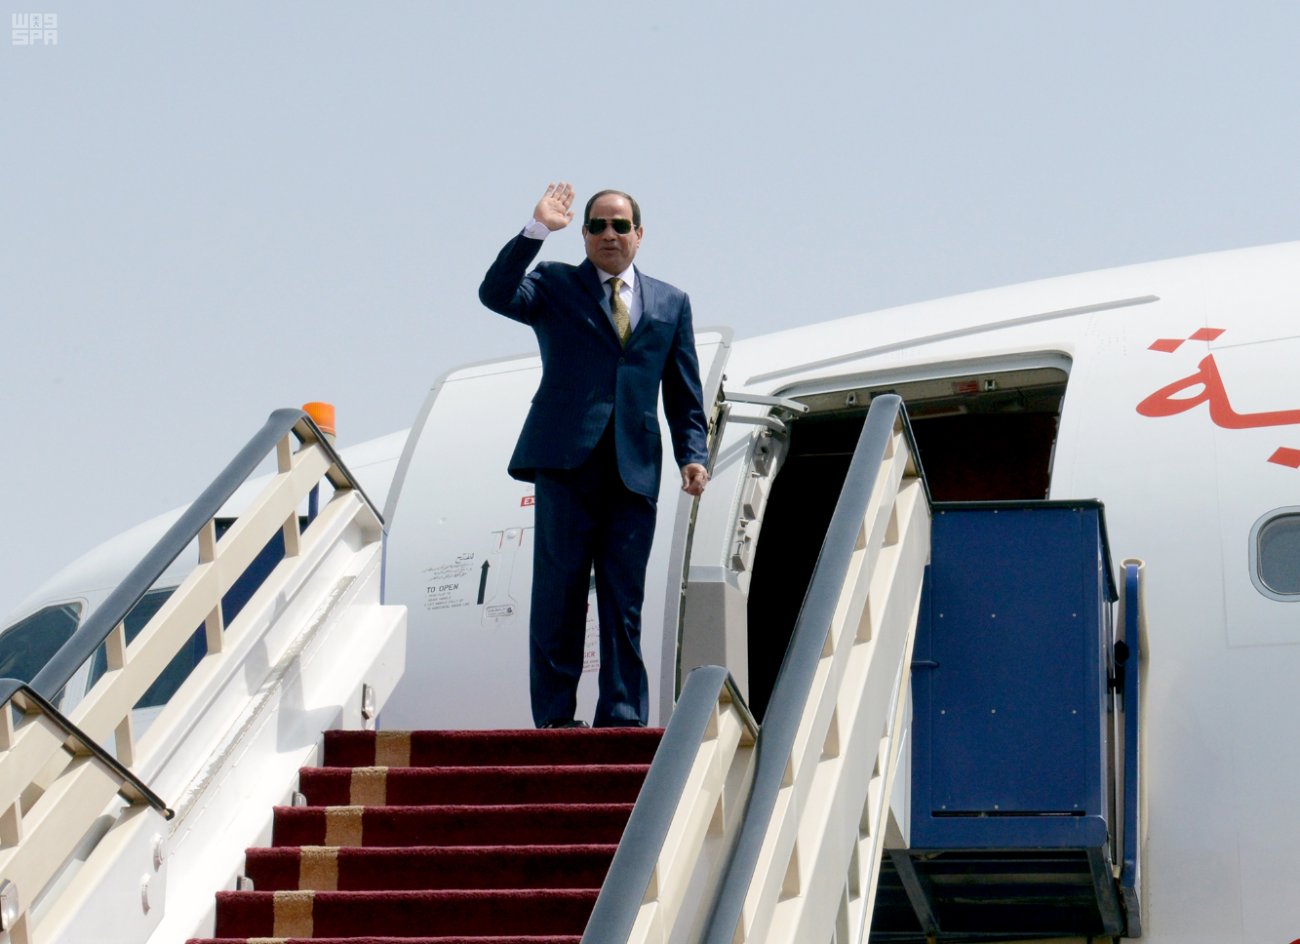 El-Sisi leaves for UAE on two-day official visit